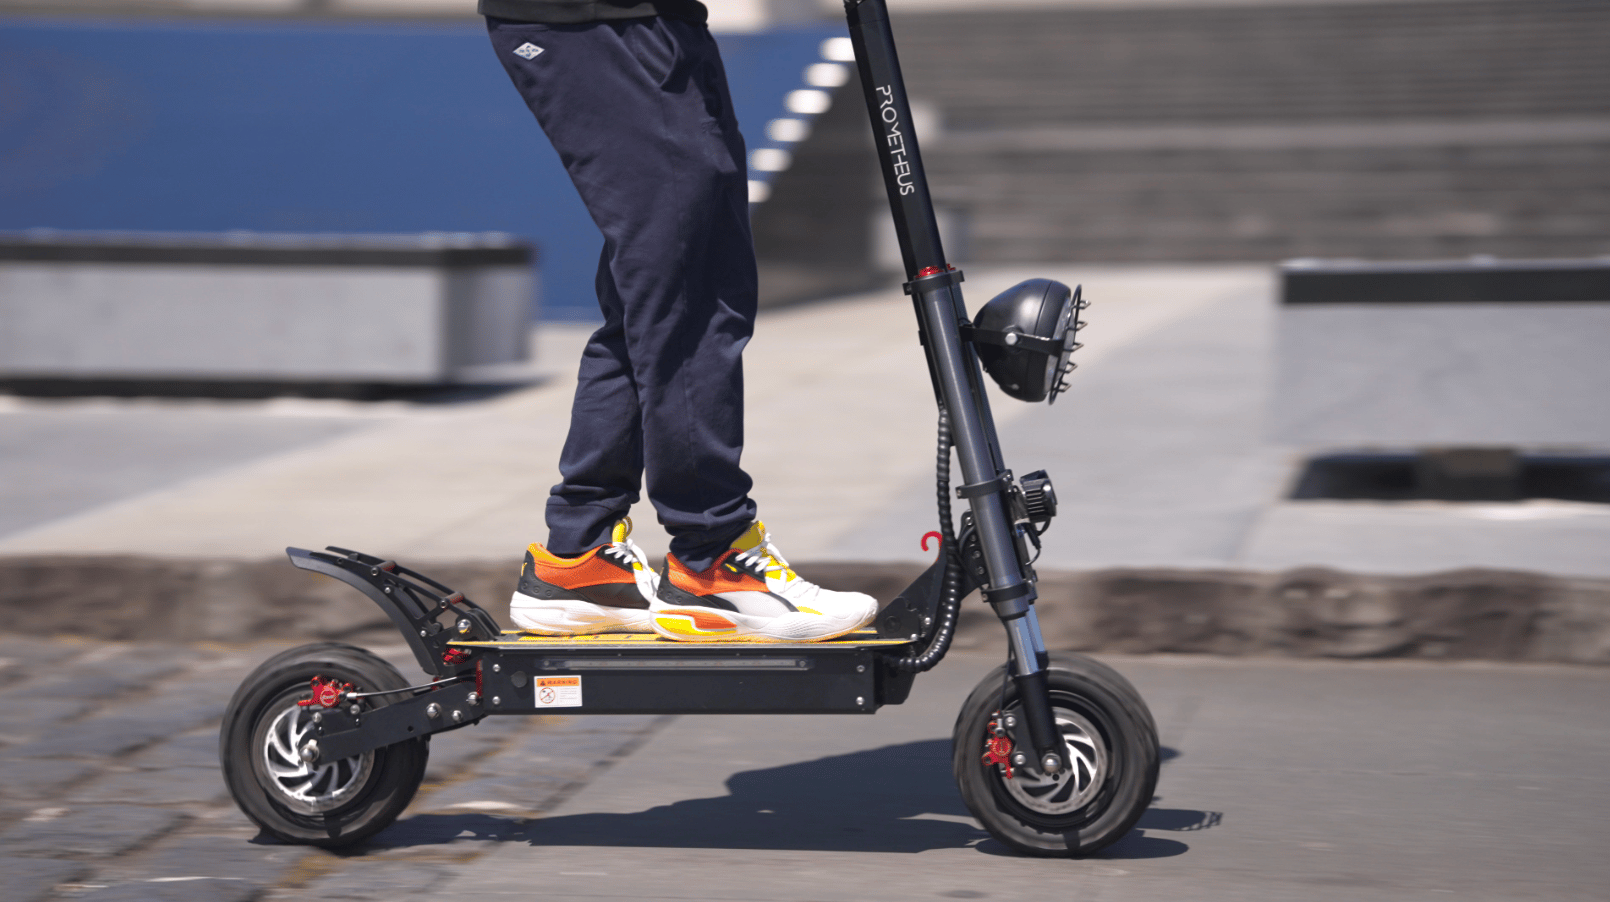 PROMETHEUS Scooter Electrico Off-road 3600W